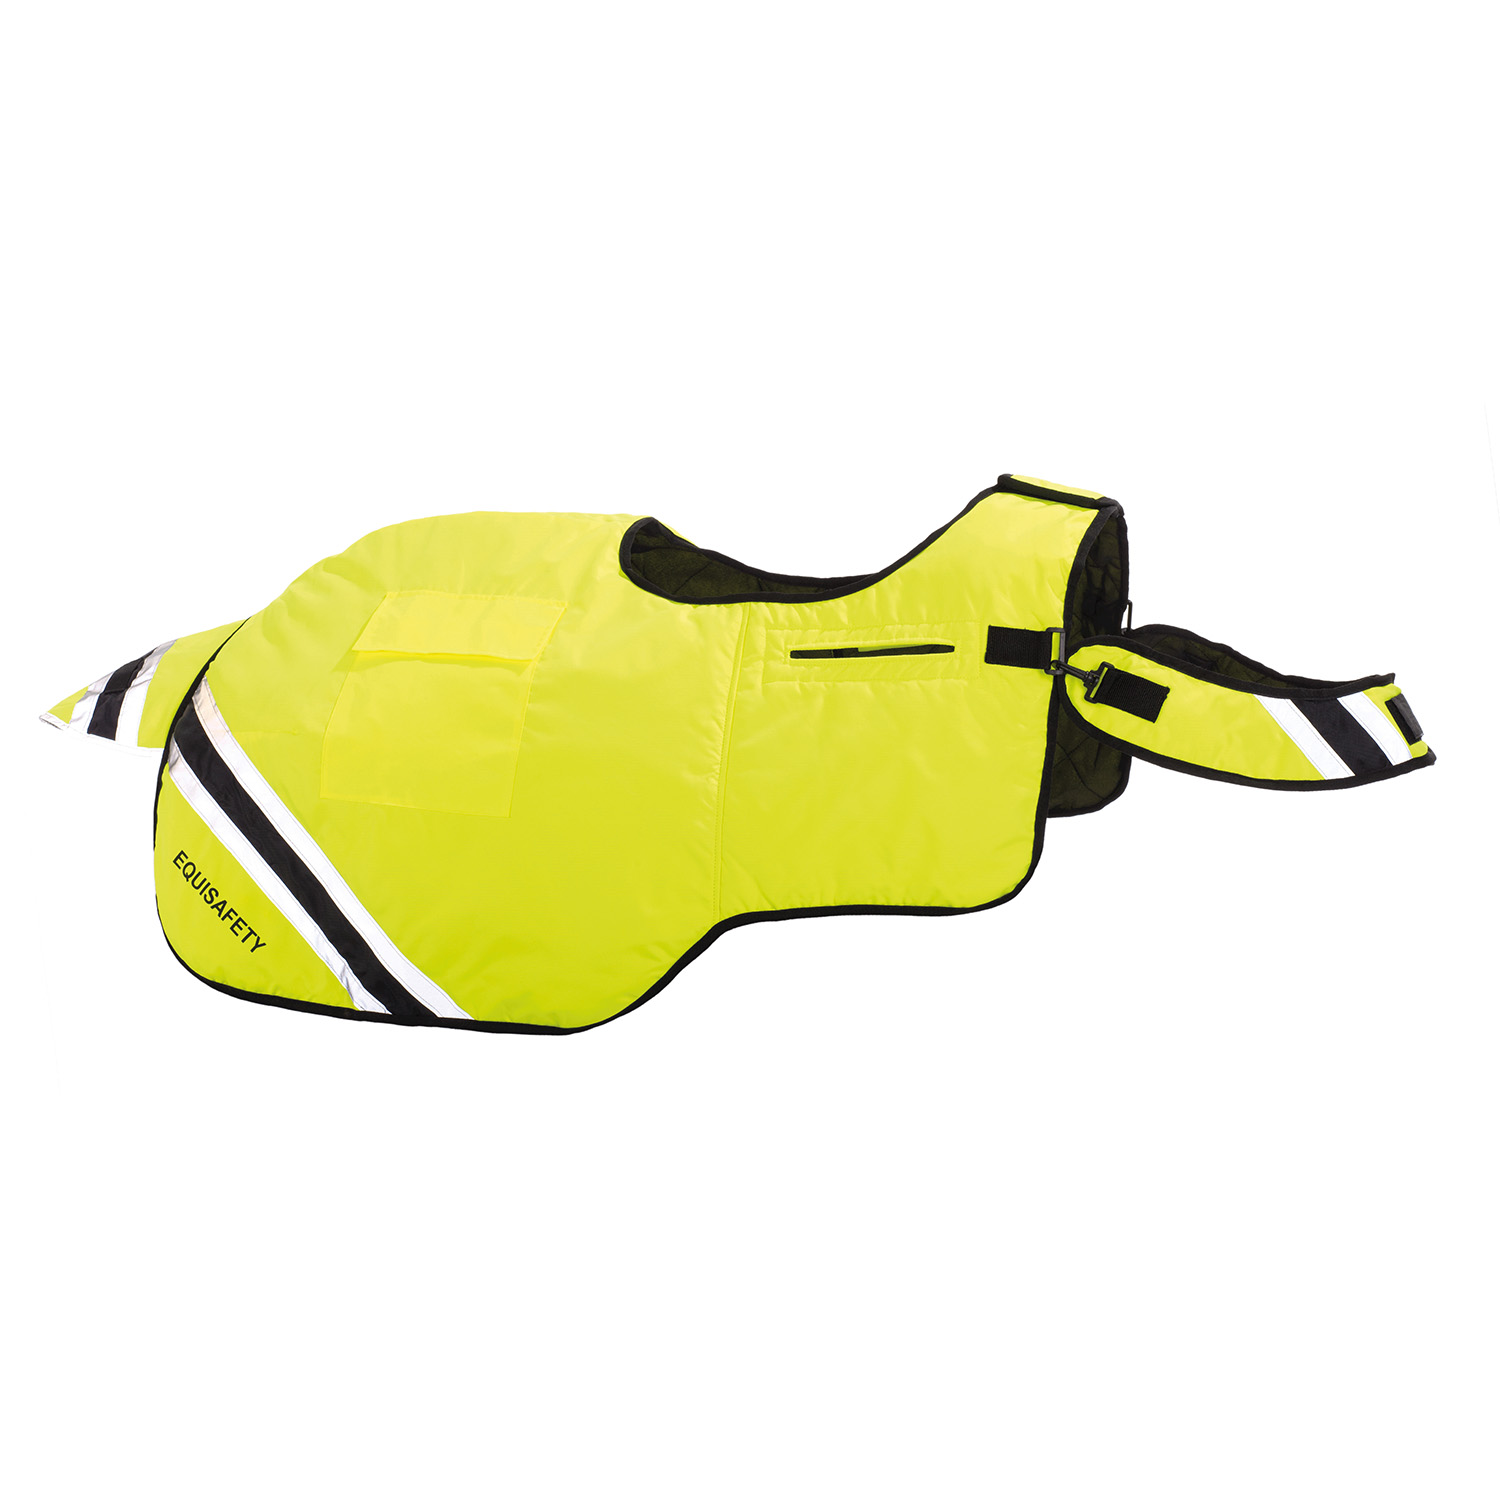 EQUISAFETY WATERPROOF QUILTED HI-VIS WRAP AROUND RUG  PONY YELLOW  PONY